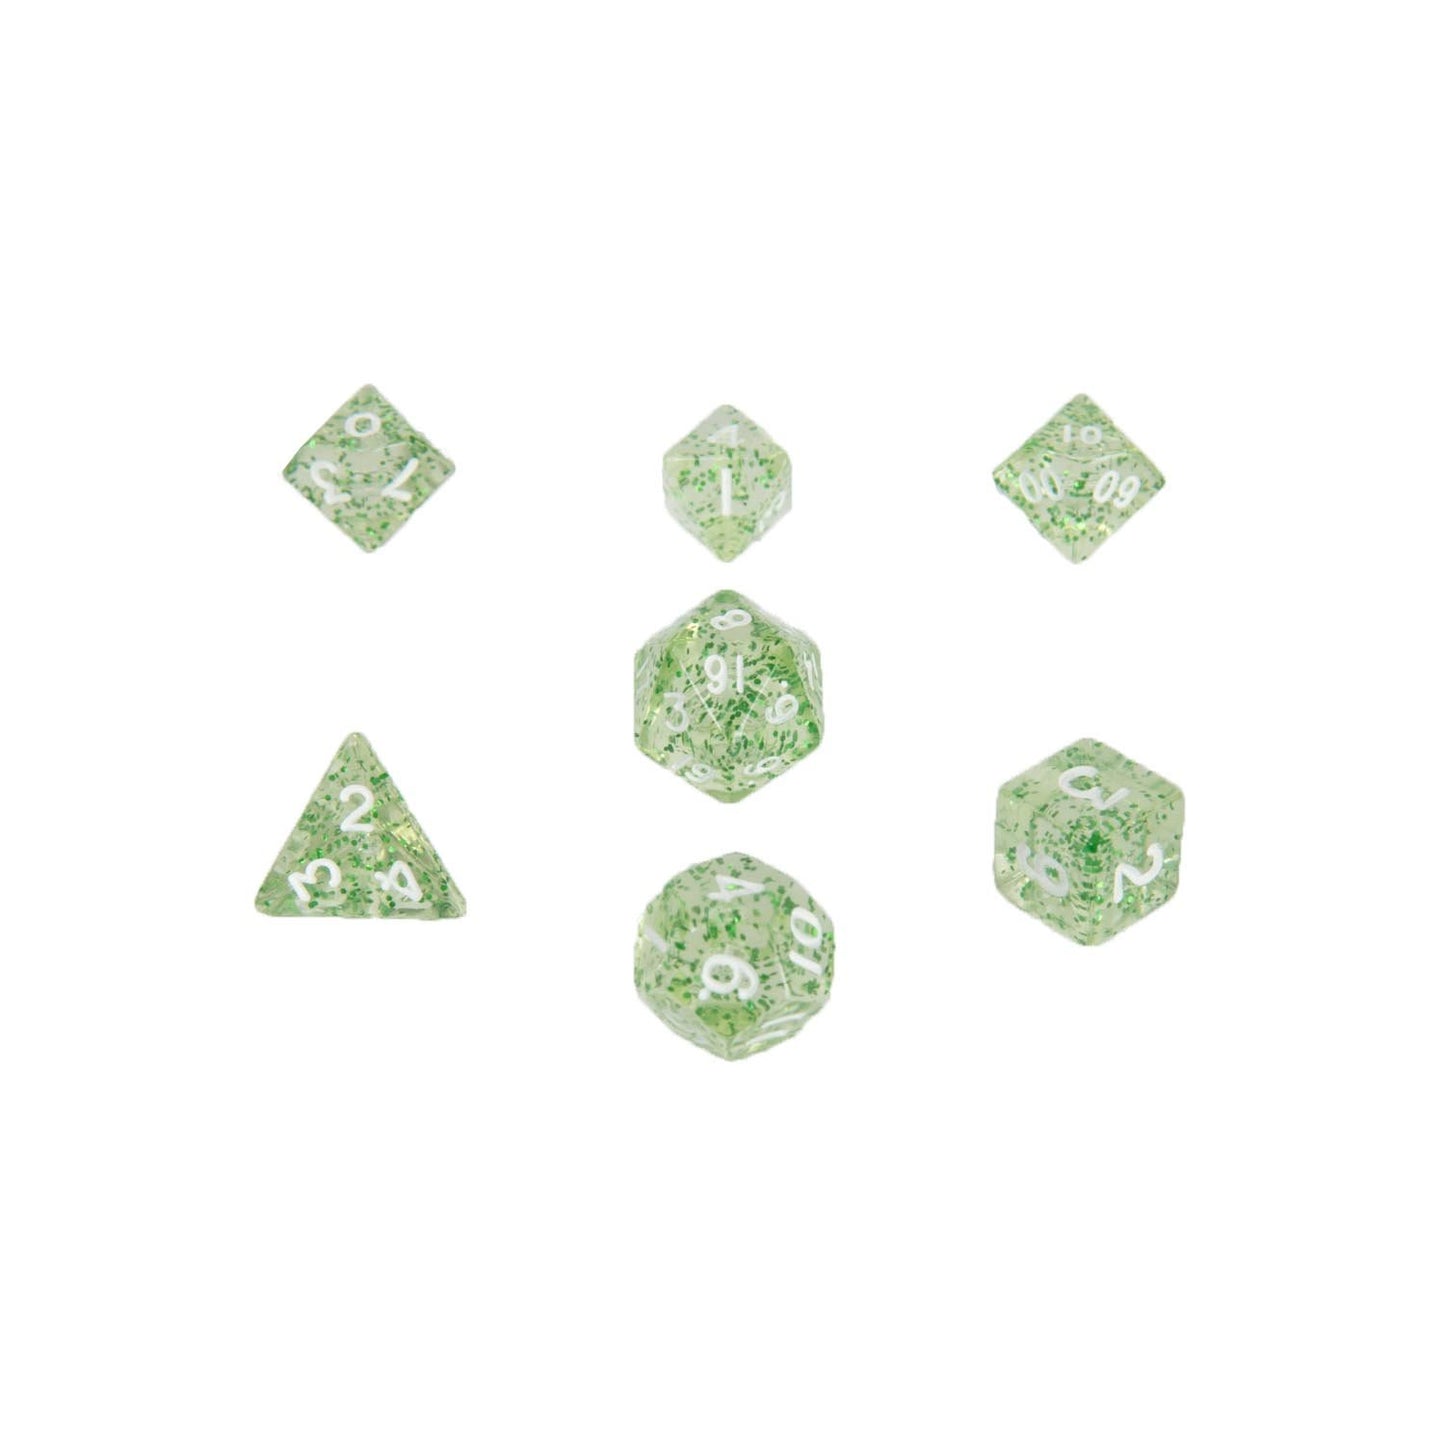 MDG MINI POLYHEDRAL DICE SET - ETHEREAL GREEN